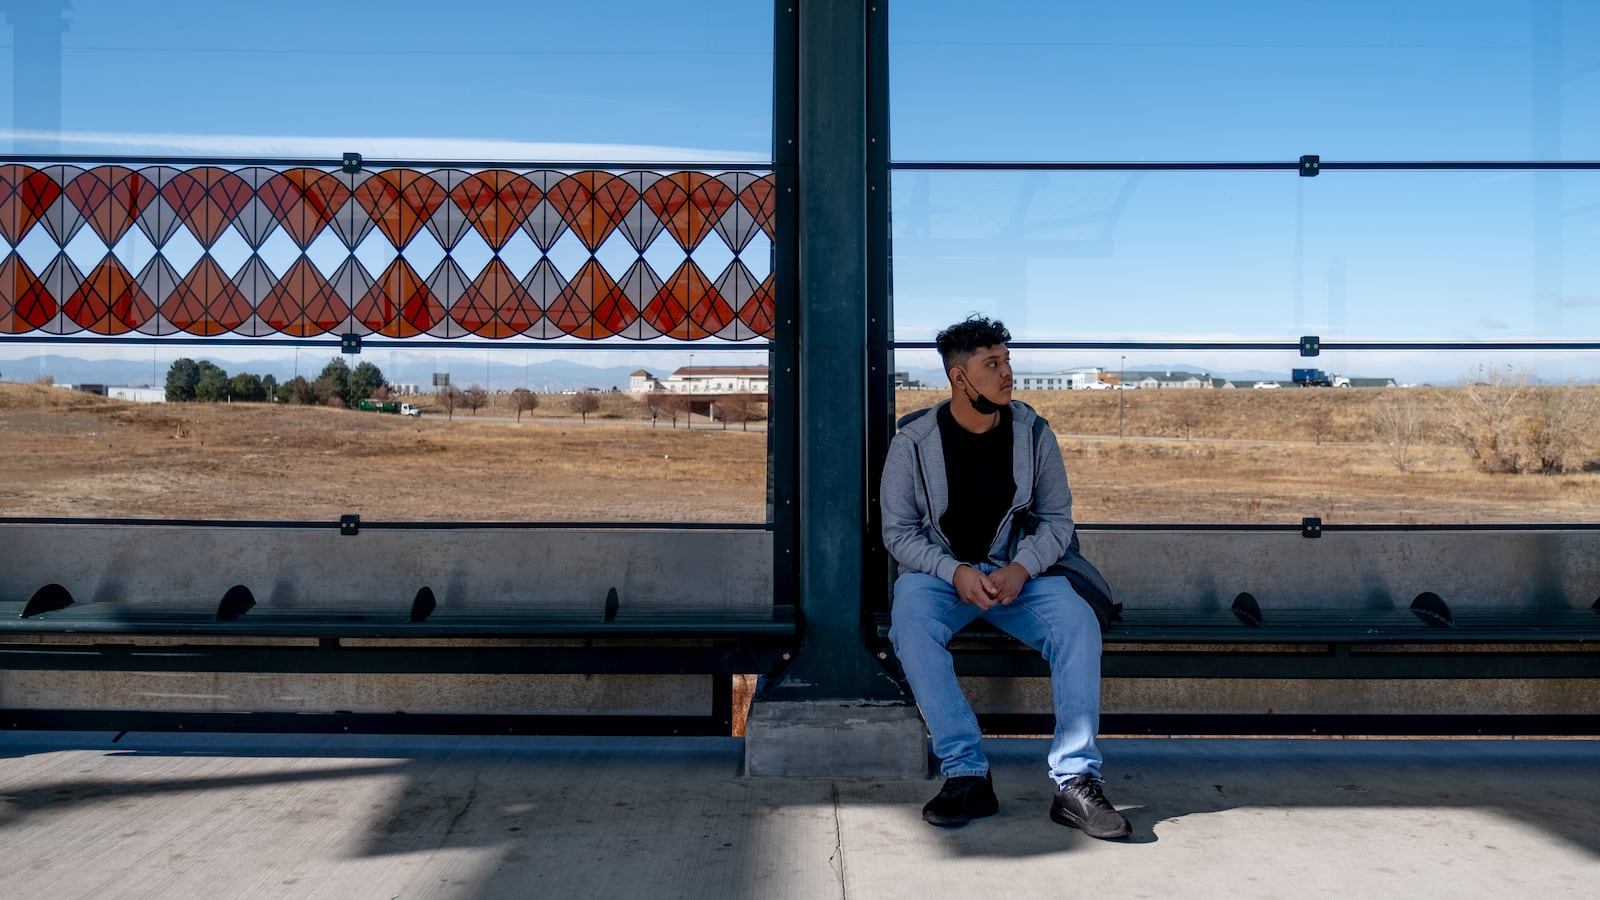 A young man, wearing a grey sweatshirt and blue jeans, waits for his train to arrive to the 40th Avenue station.